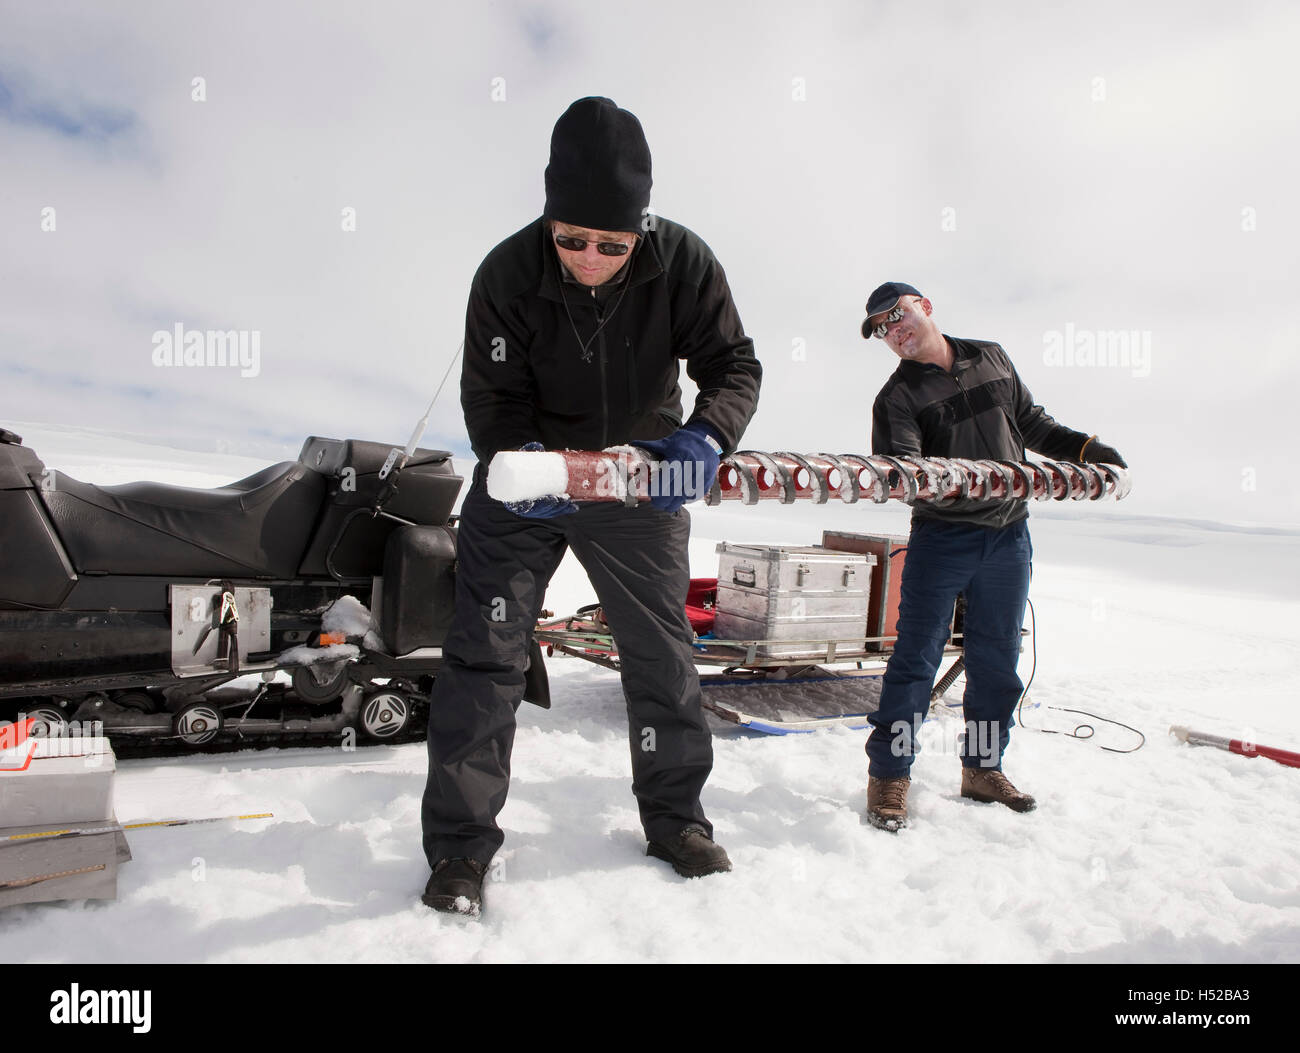 Scientists with ice core samples doing glacial research on Vatnajokul Ice Cap, Iceland Stock Photo